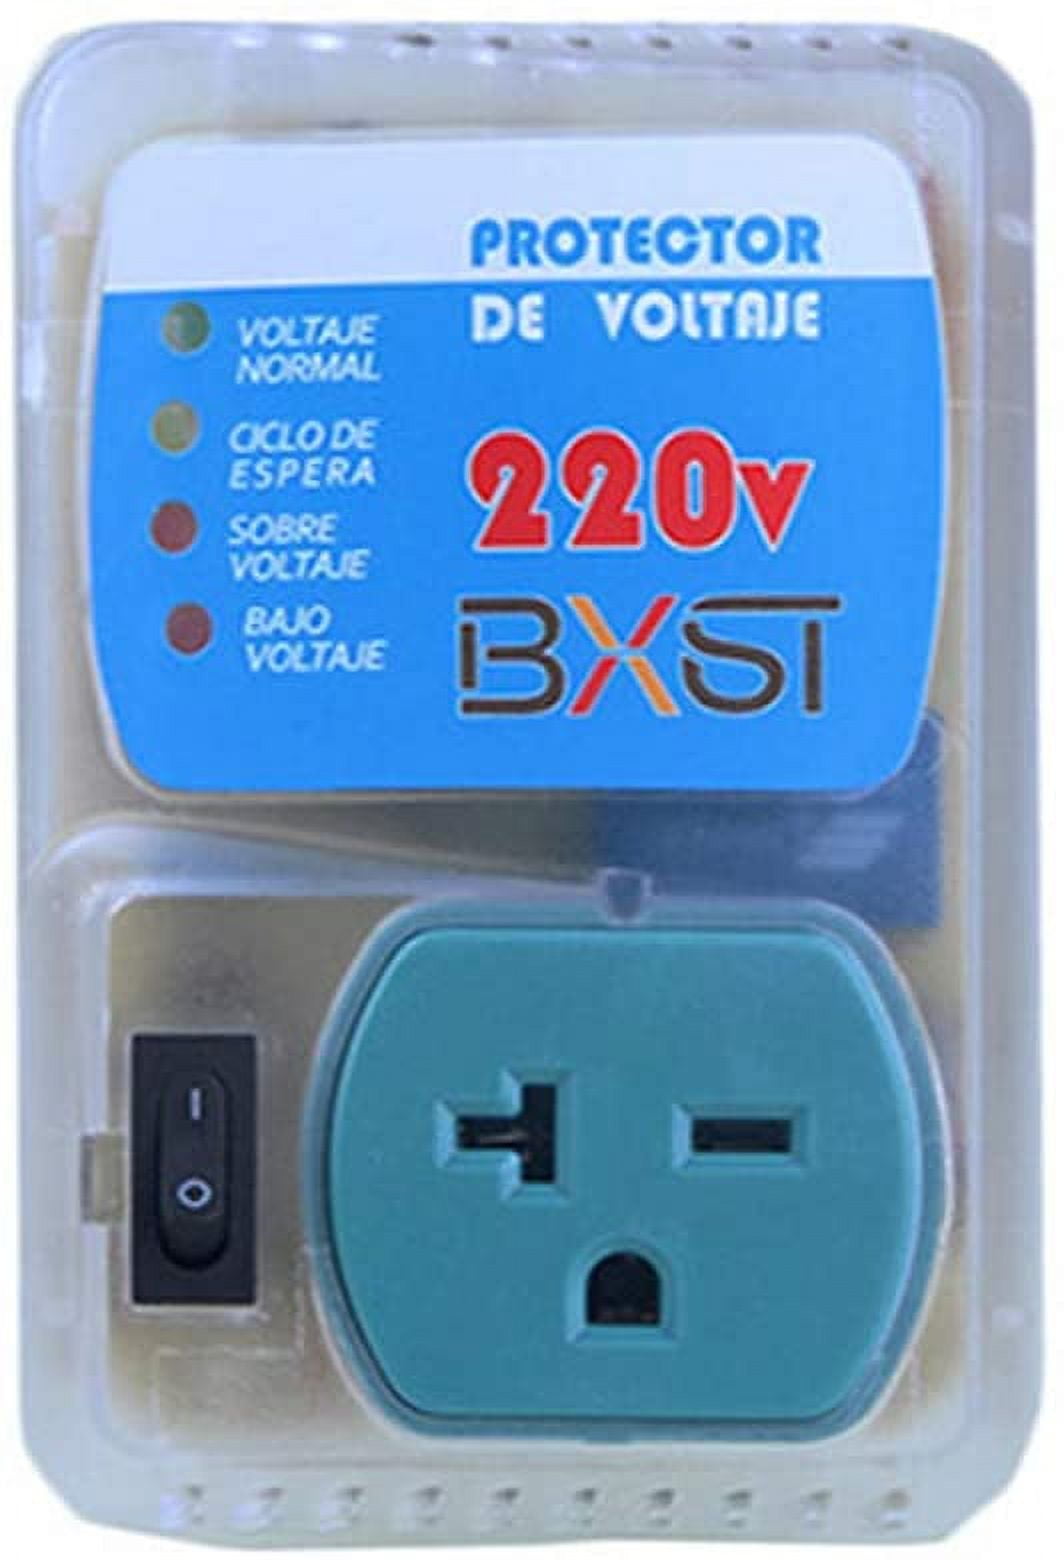  BSEED Electronic Surge Protector for Home Appliance